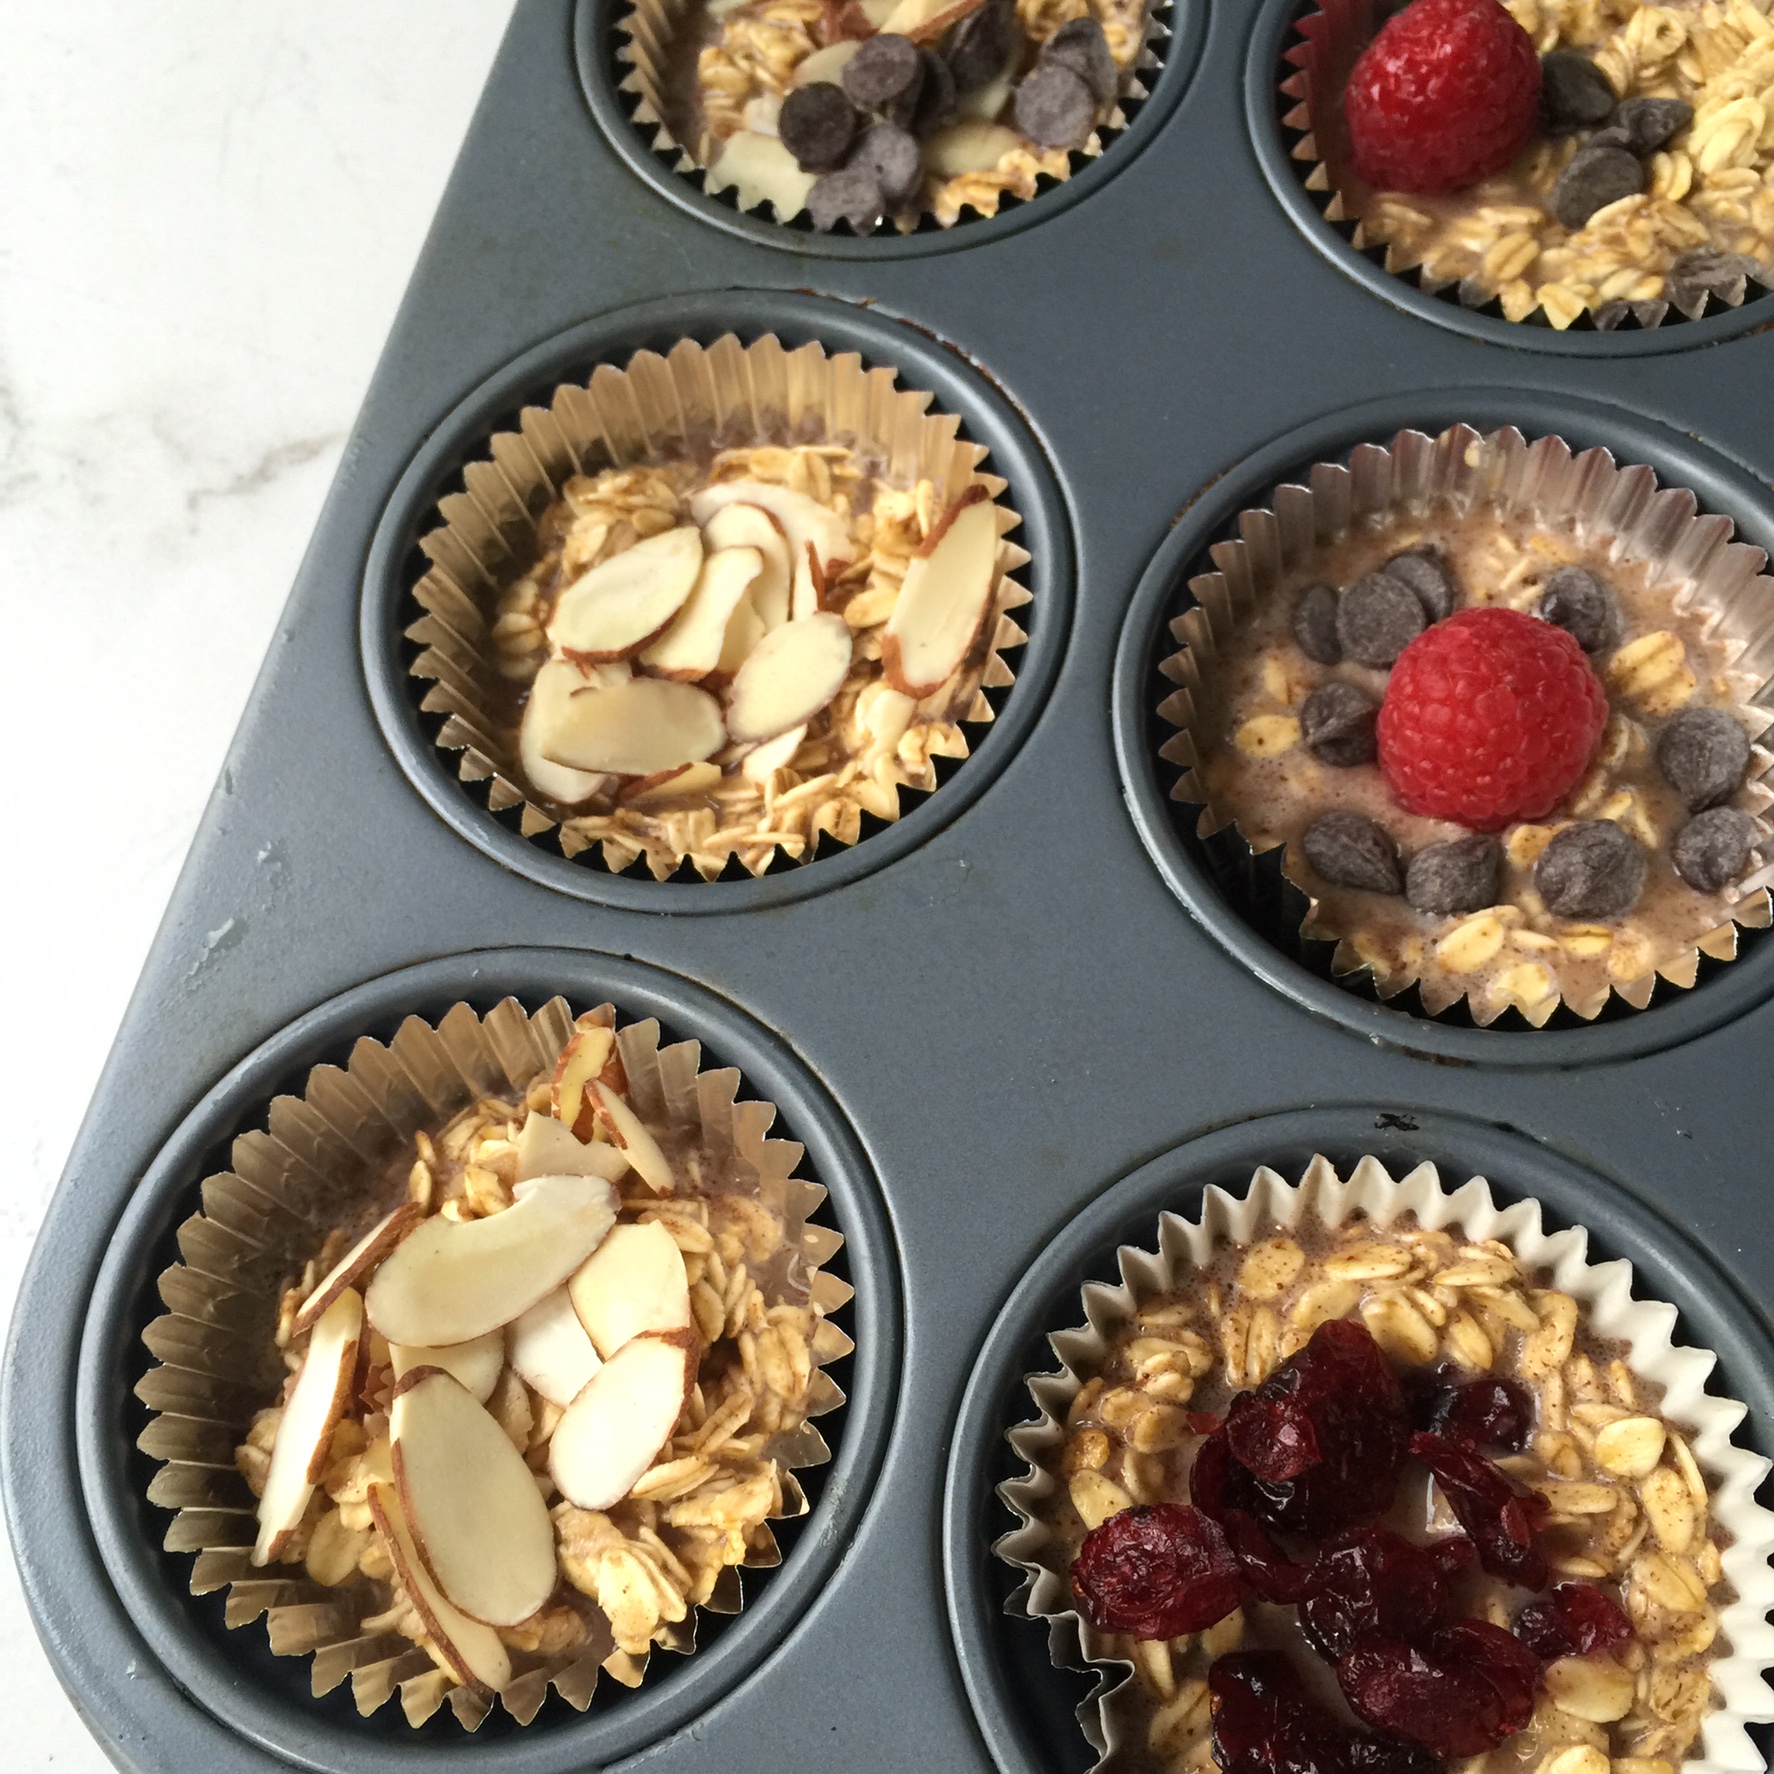 Baked Oatmeal to-go cups